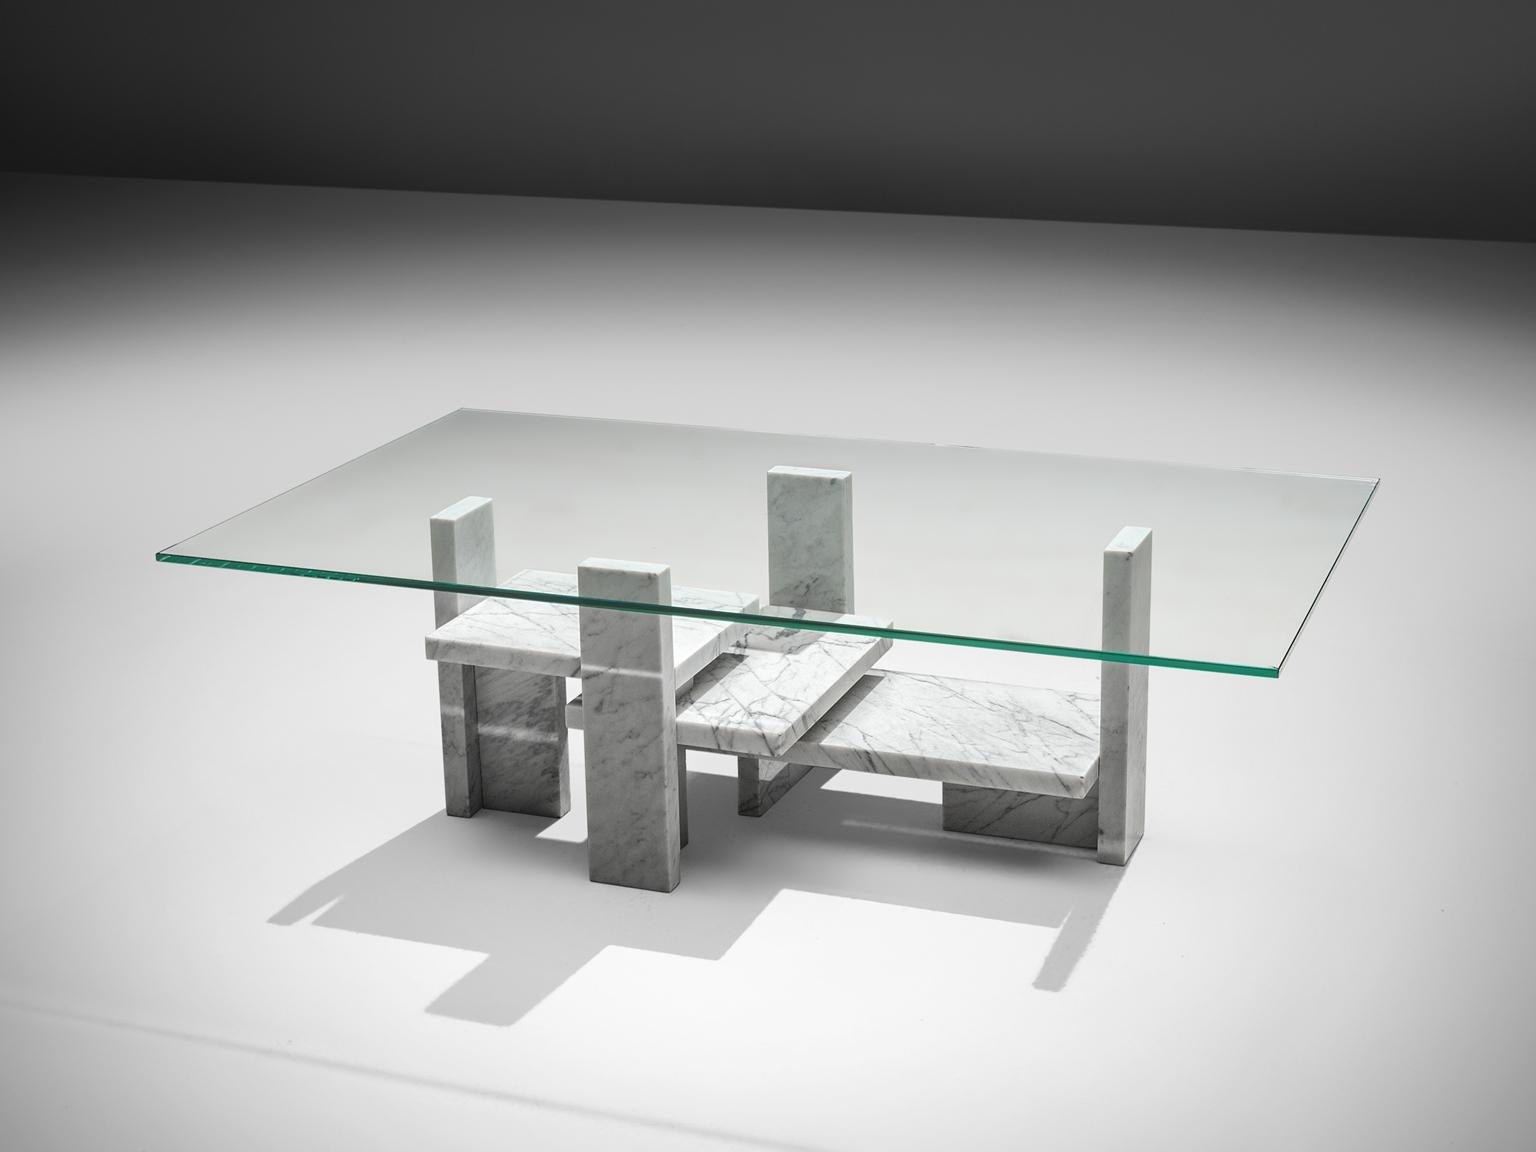 Willy Ballez, coffee table, marble, glass, Belgium, 1970. 

This sculptural table is a skilful example of postmodern design by the Belgian designer Willy Ballez. The glass and marble table is architectural in its design is it is built up of